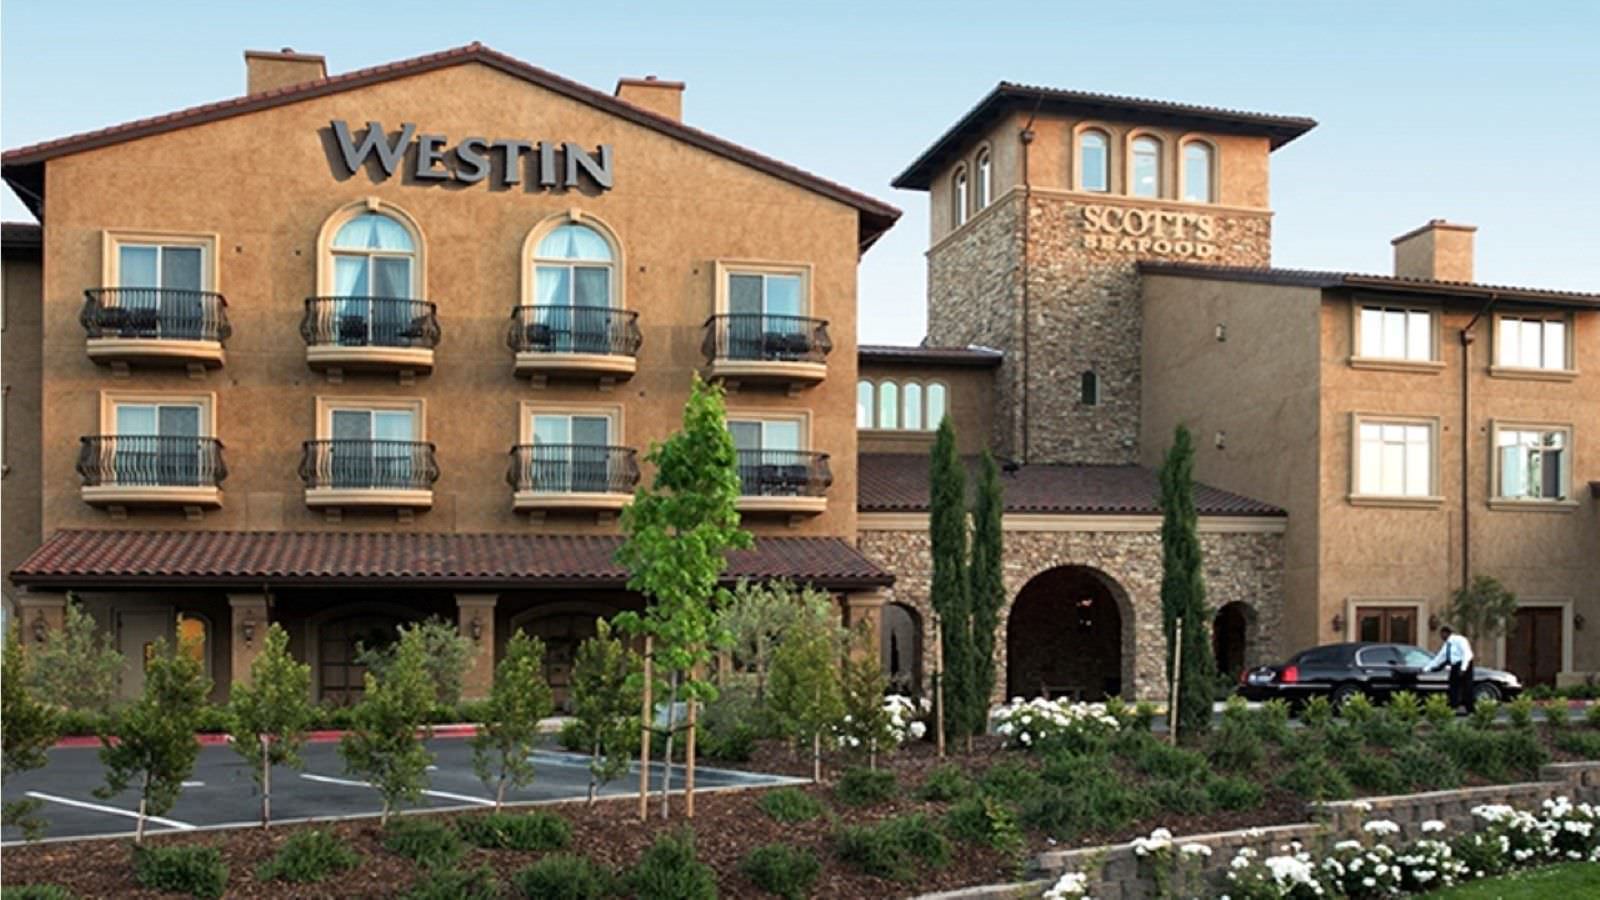 Ultimate List of Best Luxury Hotels in California, The Westin Sacramento